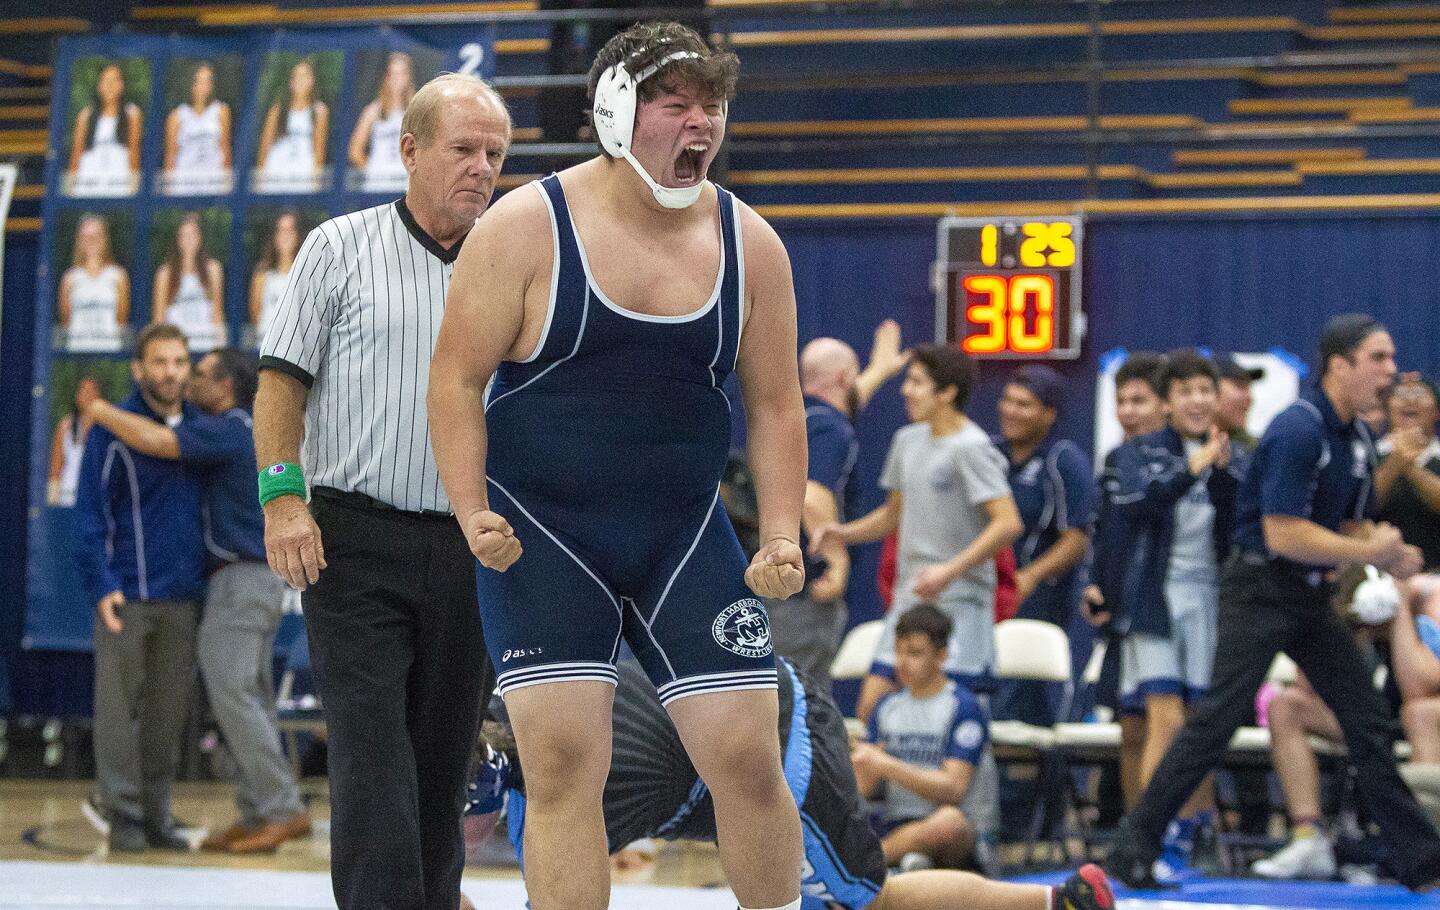 Newport Harbor High's Eddie Rios celebrates after beating Corona del Mar's Luke Anderson in the 285-pound division in a Wave League match on Wednesday.